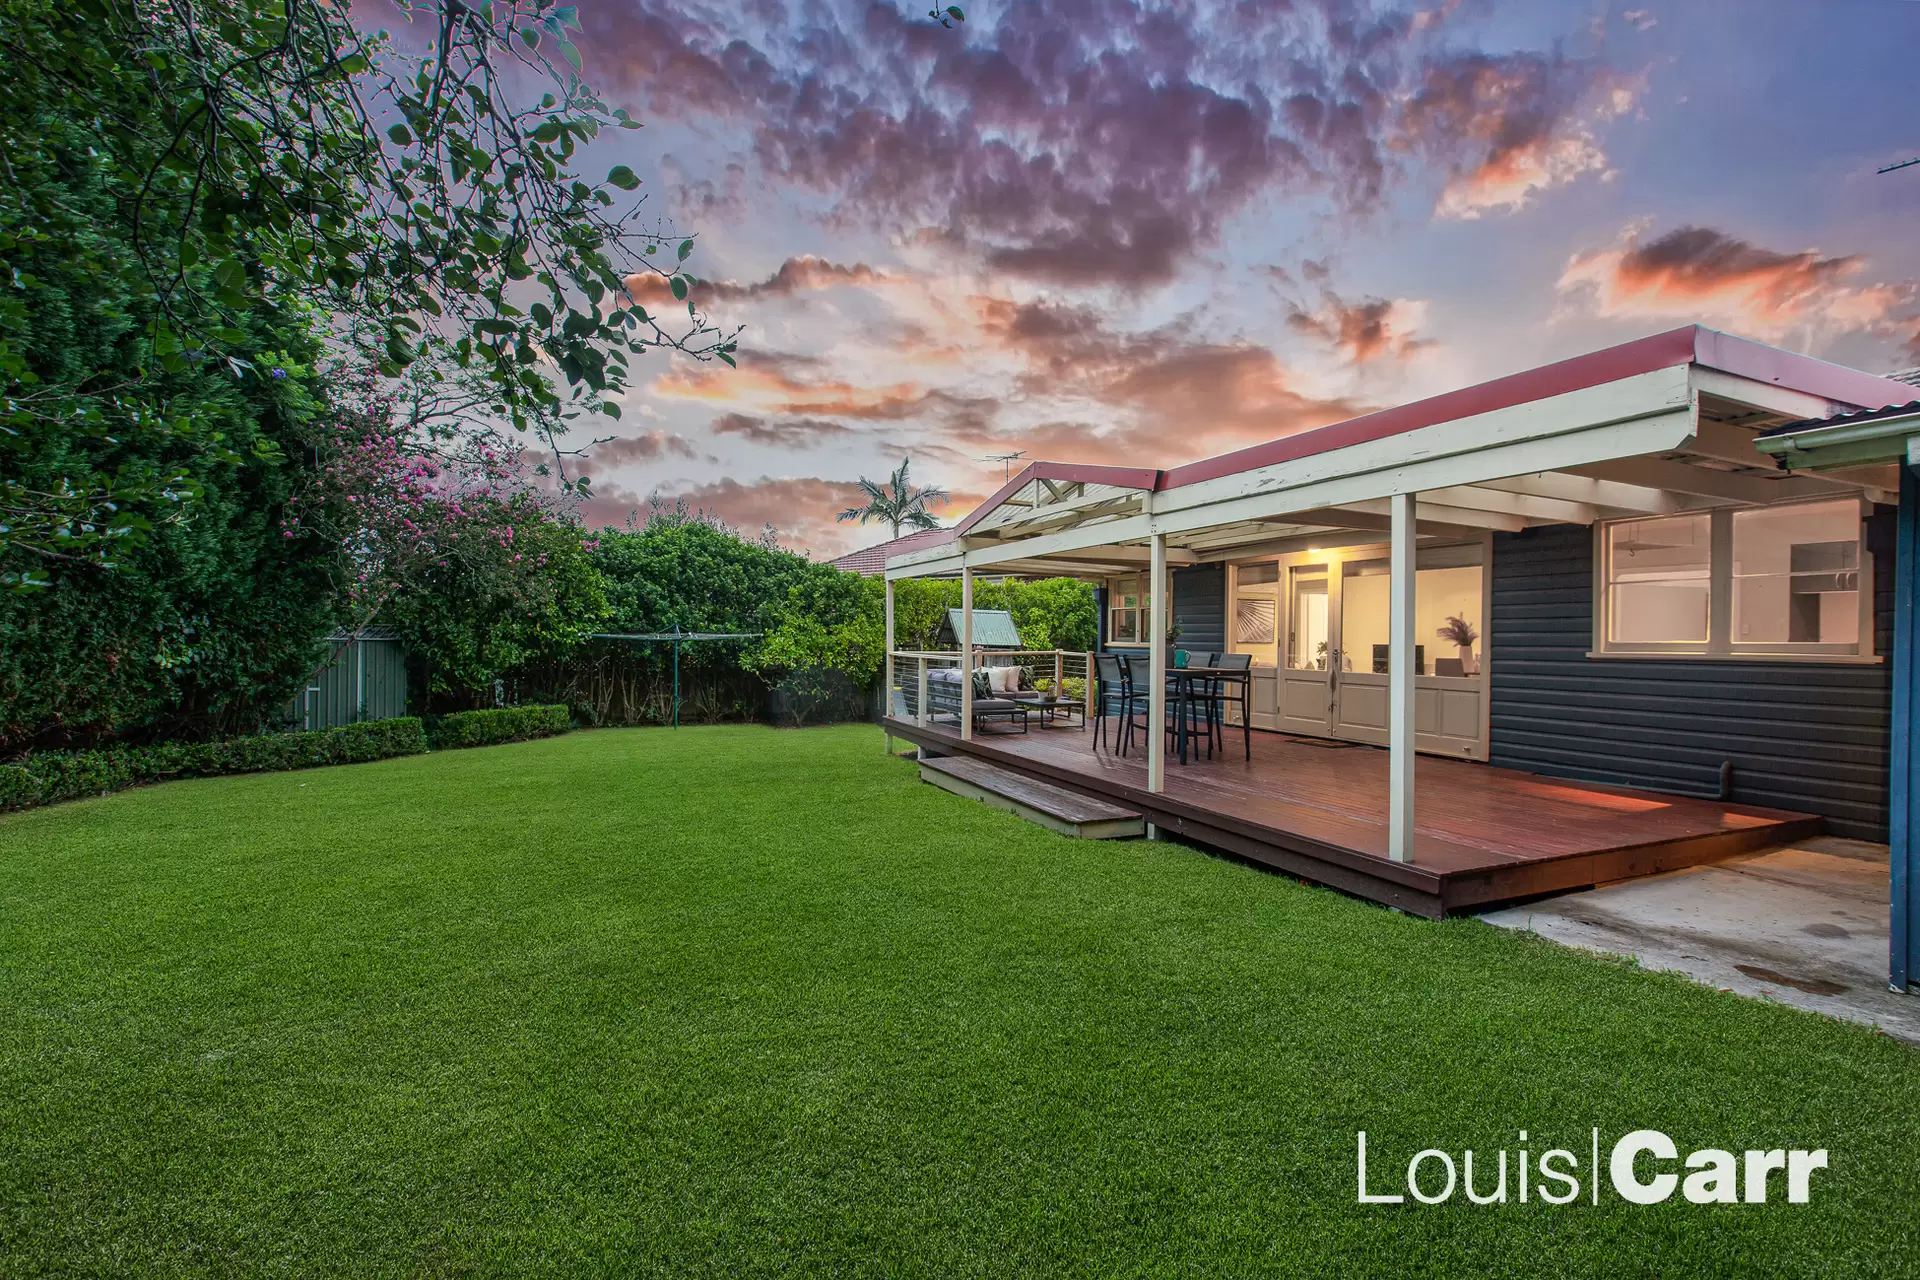 Photo #1: 17 Darlington Drive, Cherrybrook - Sold by Louis Carr Real Estate